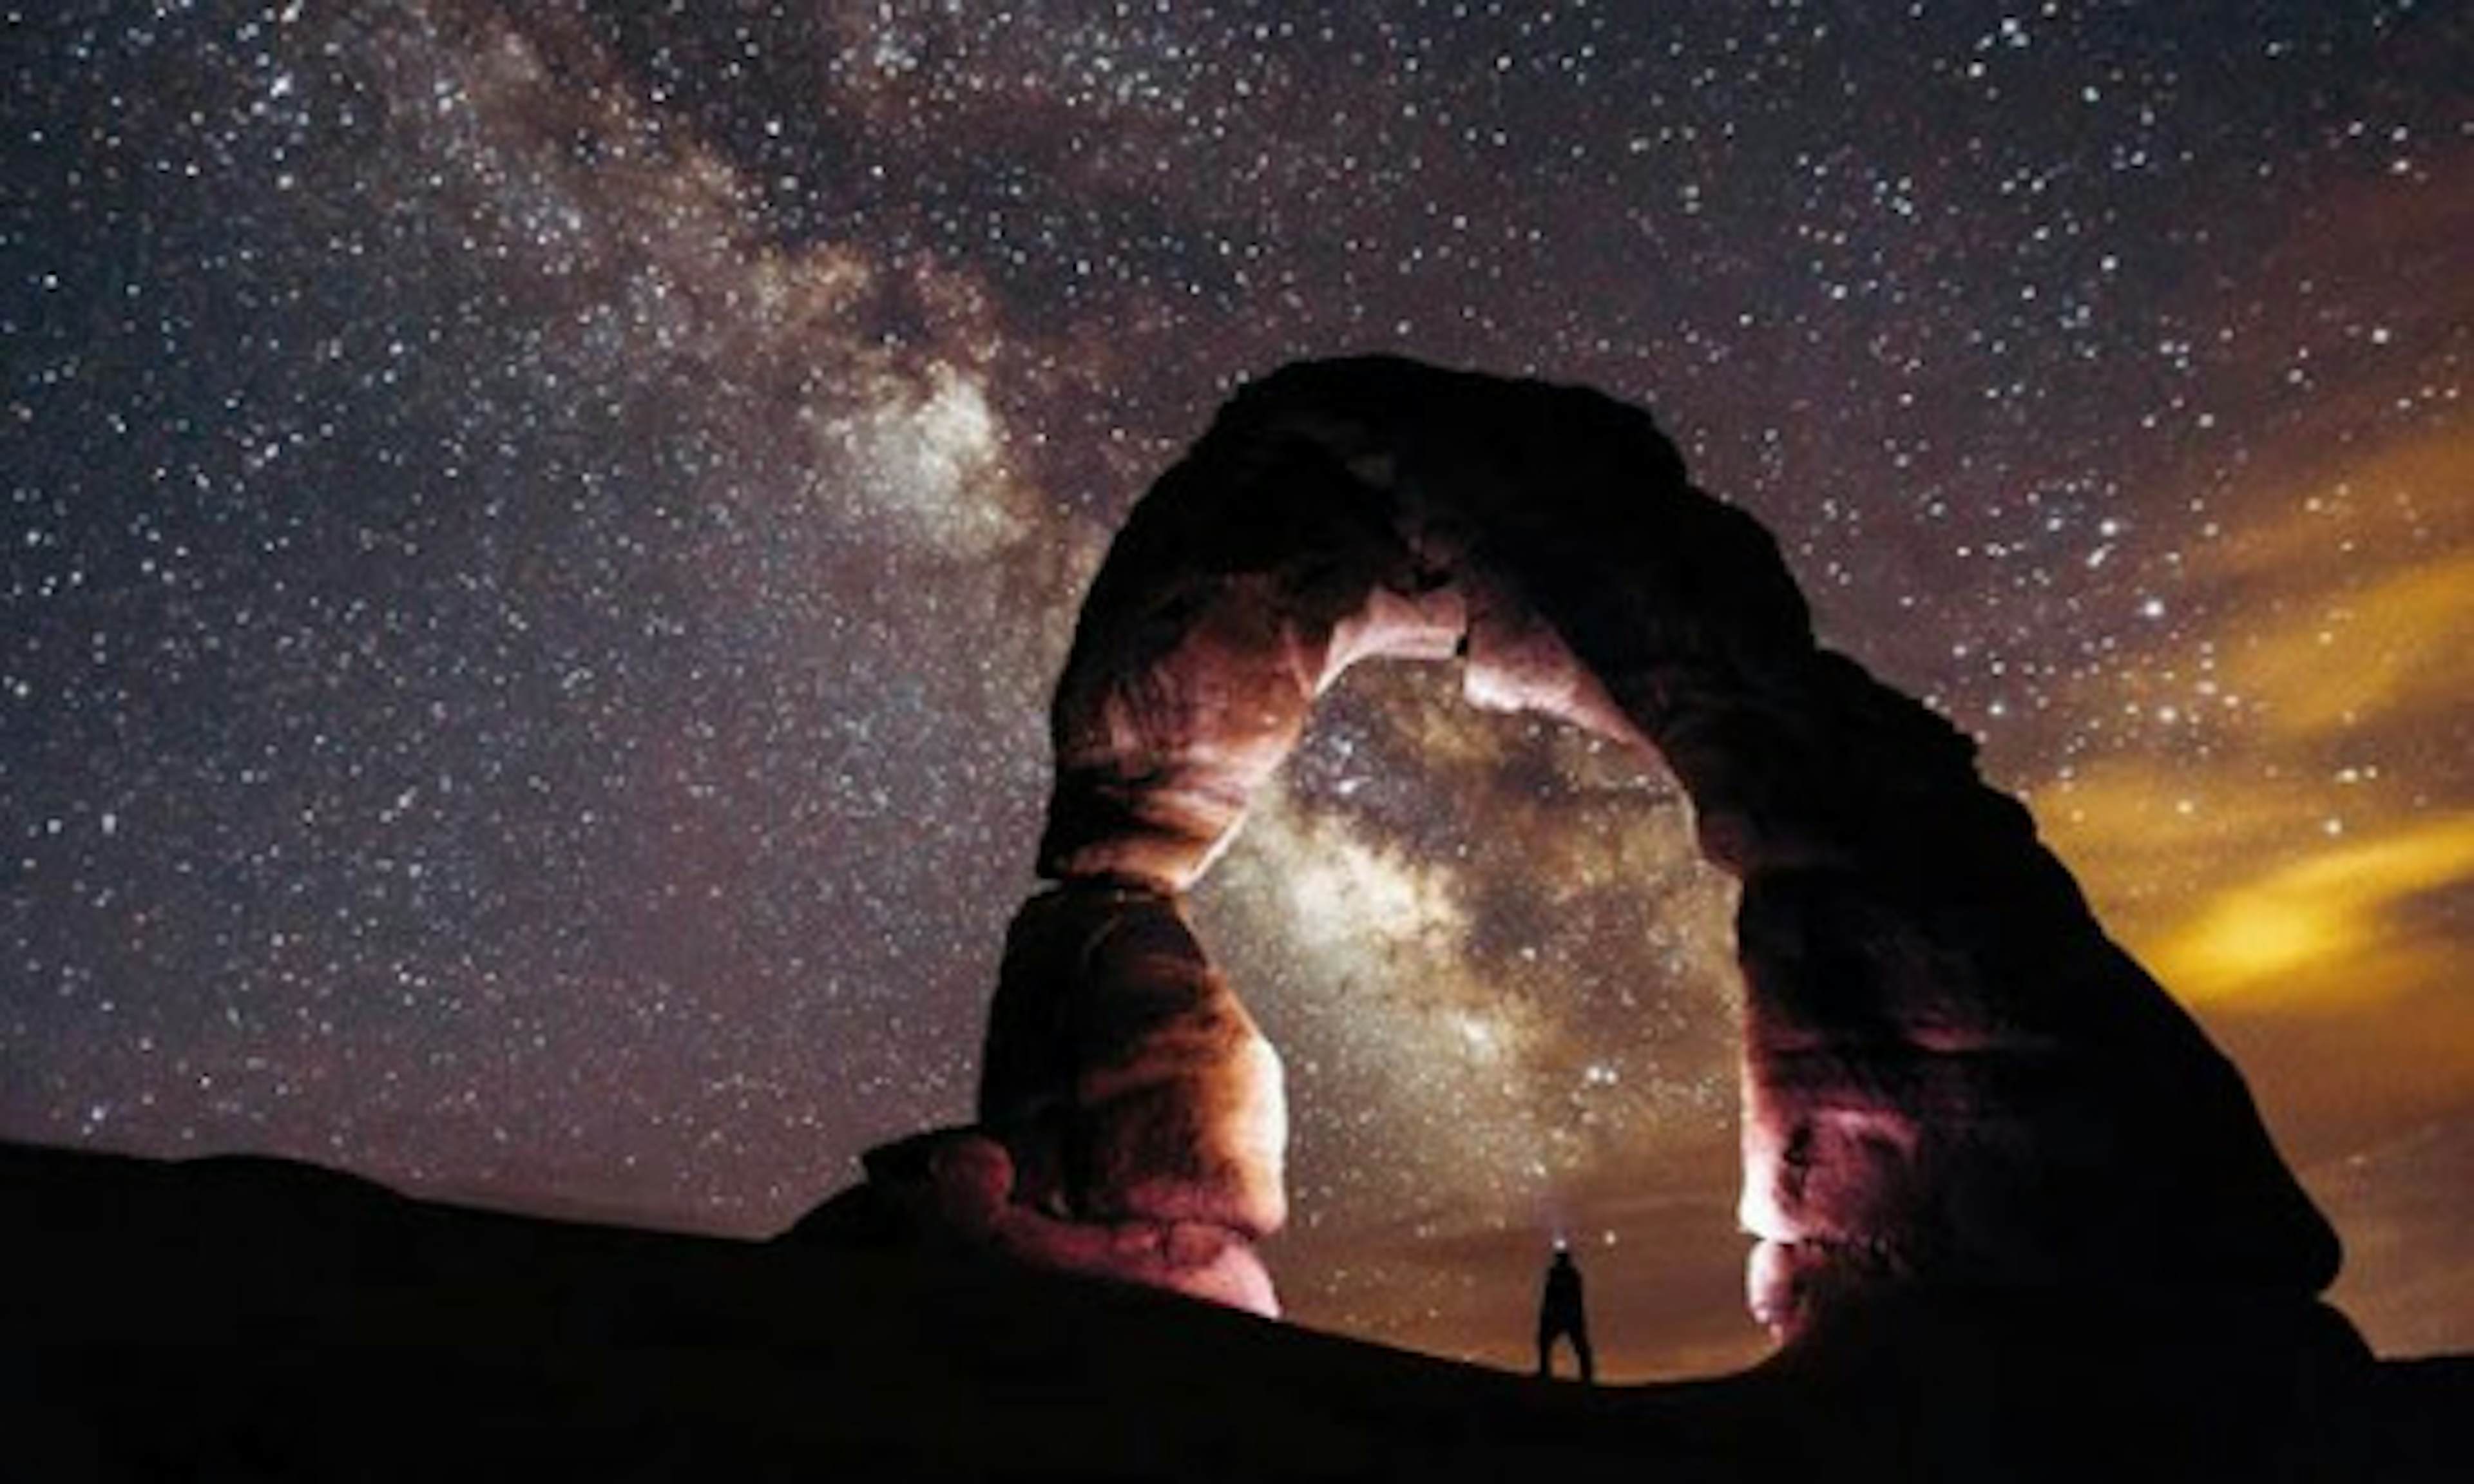 A small silhouette of a stargazer looking up through a stone arch in the Arches National Park, with a brilliant view of the stars above